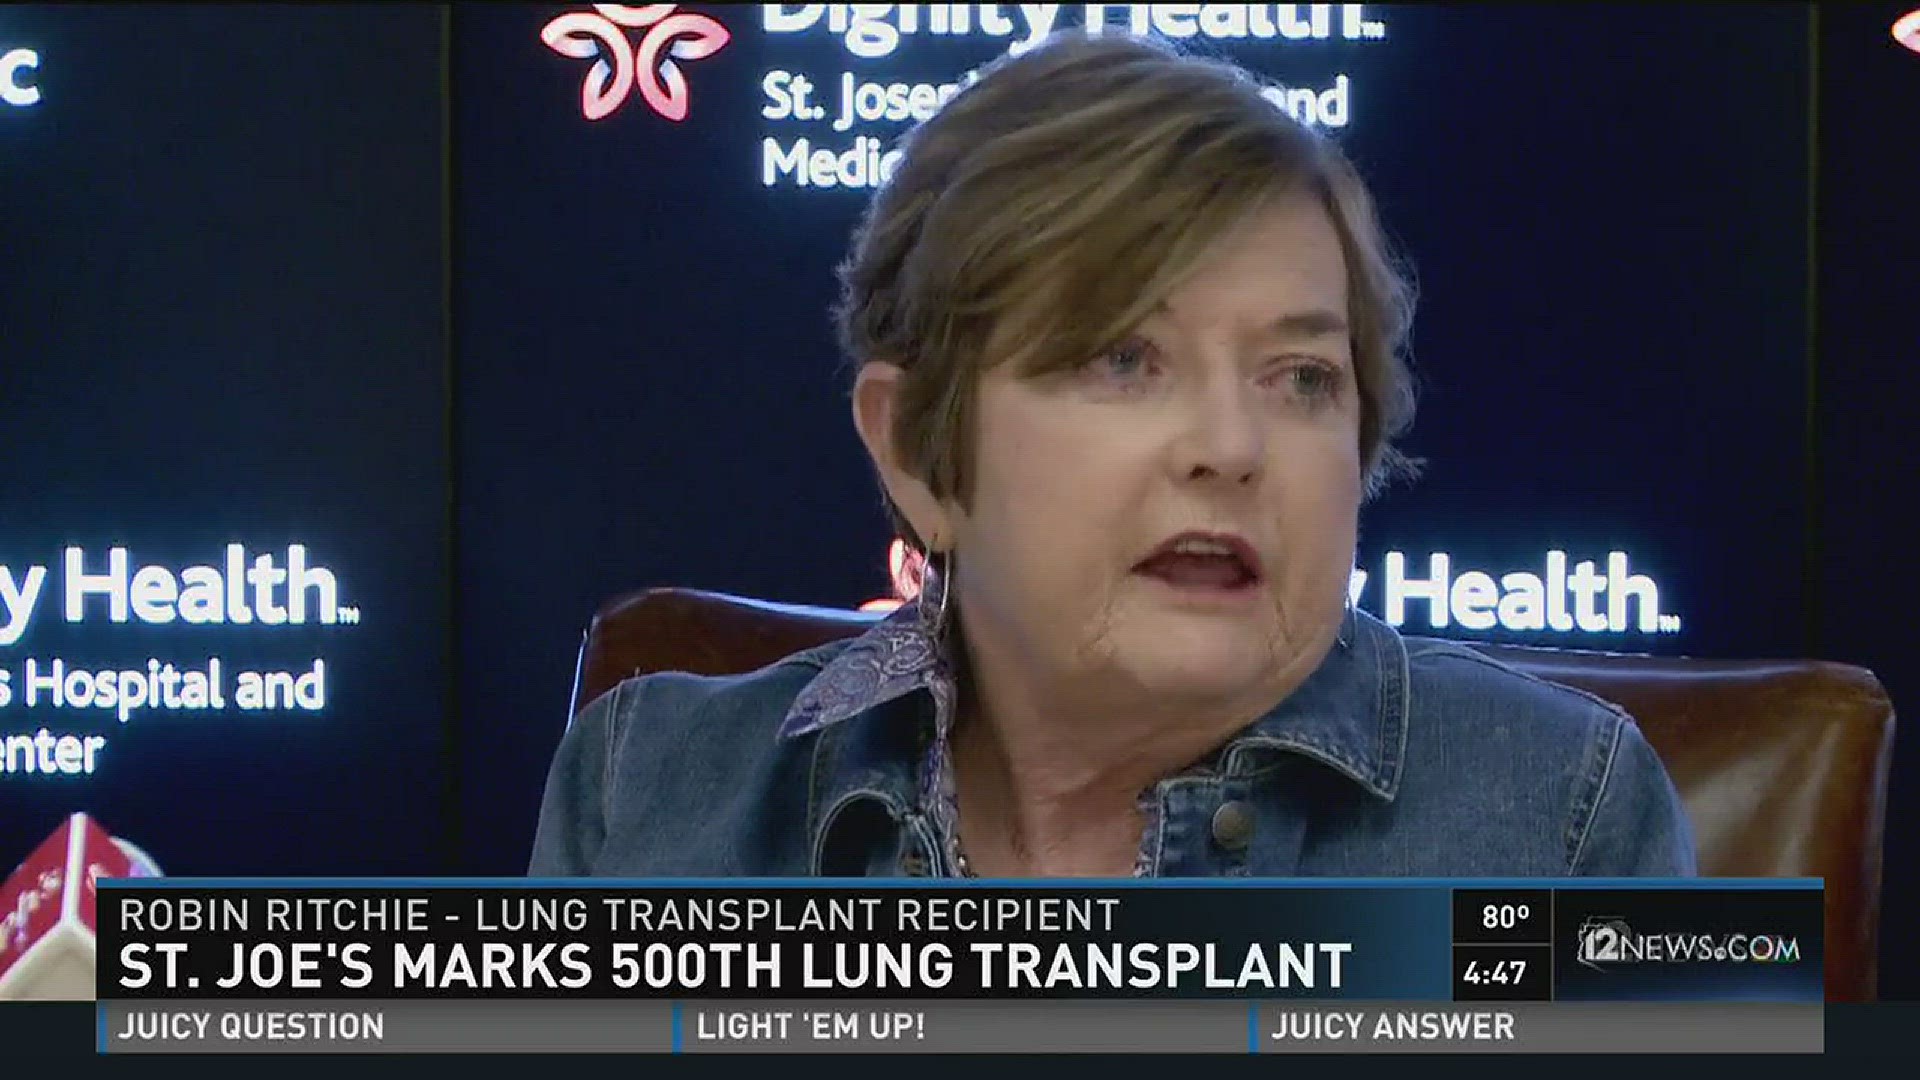 This Thanksgiving, one woman got her wish of a lung transplant.